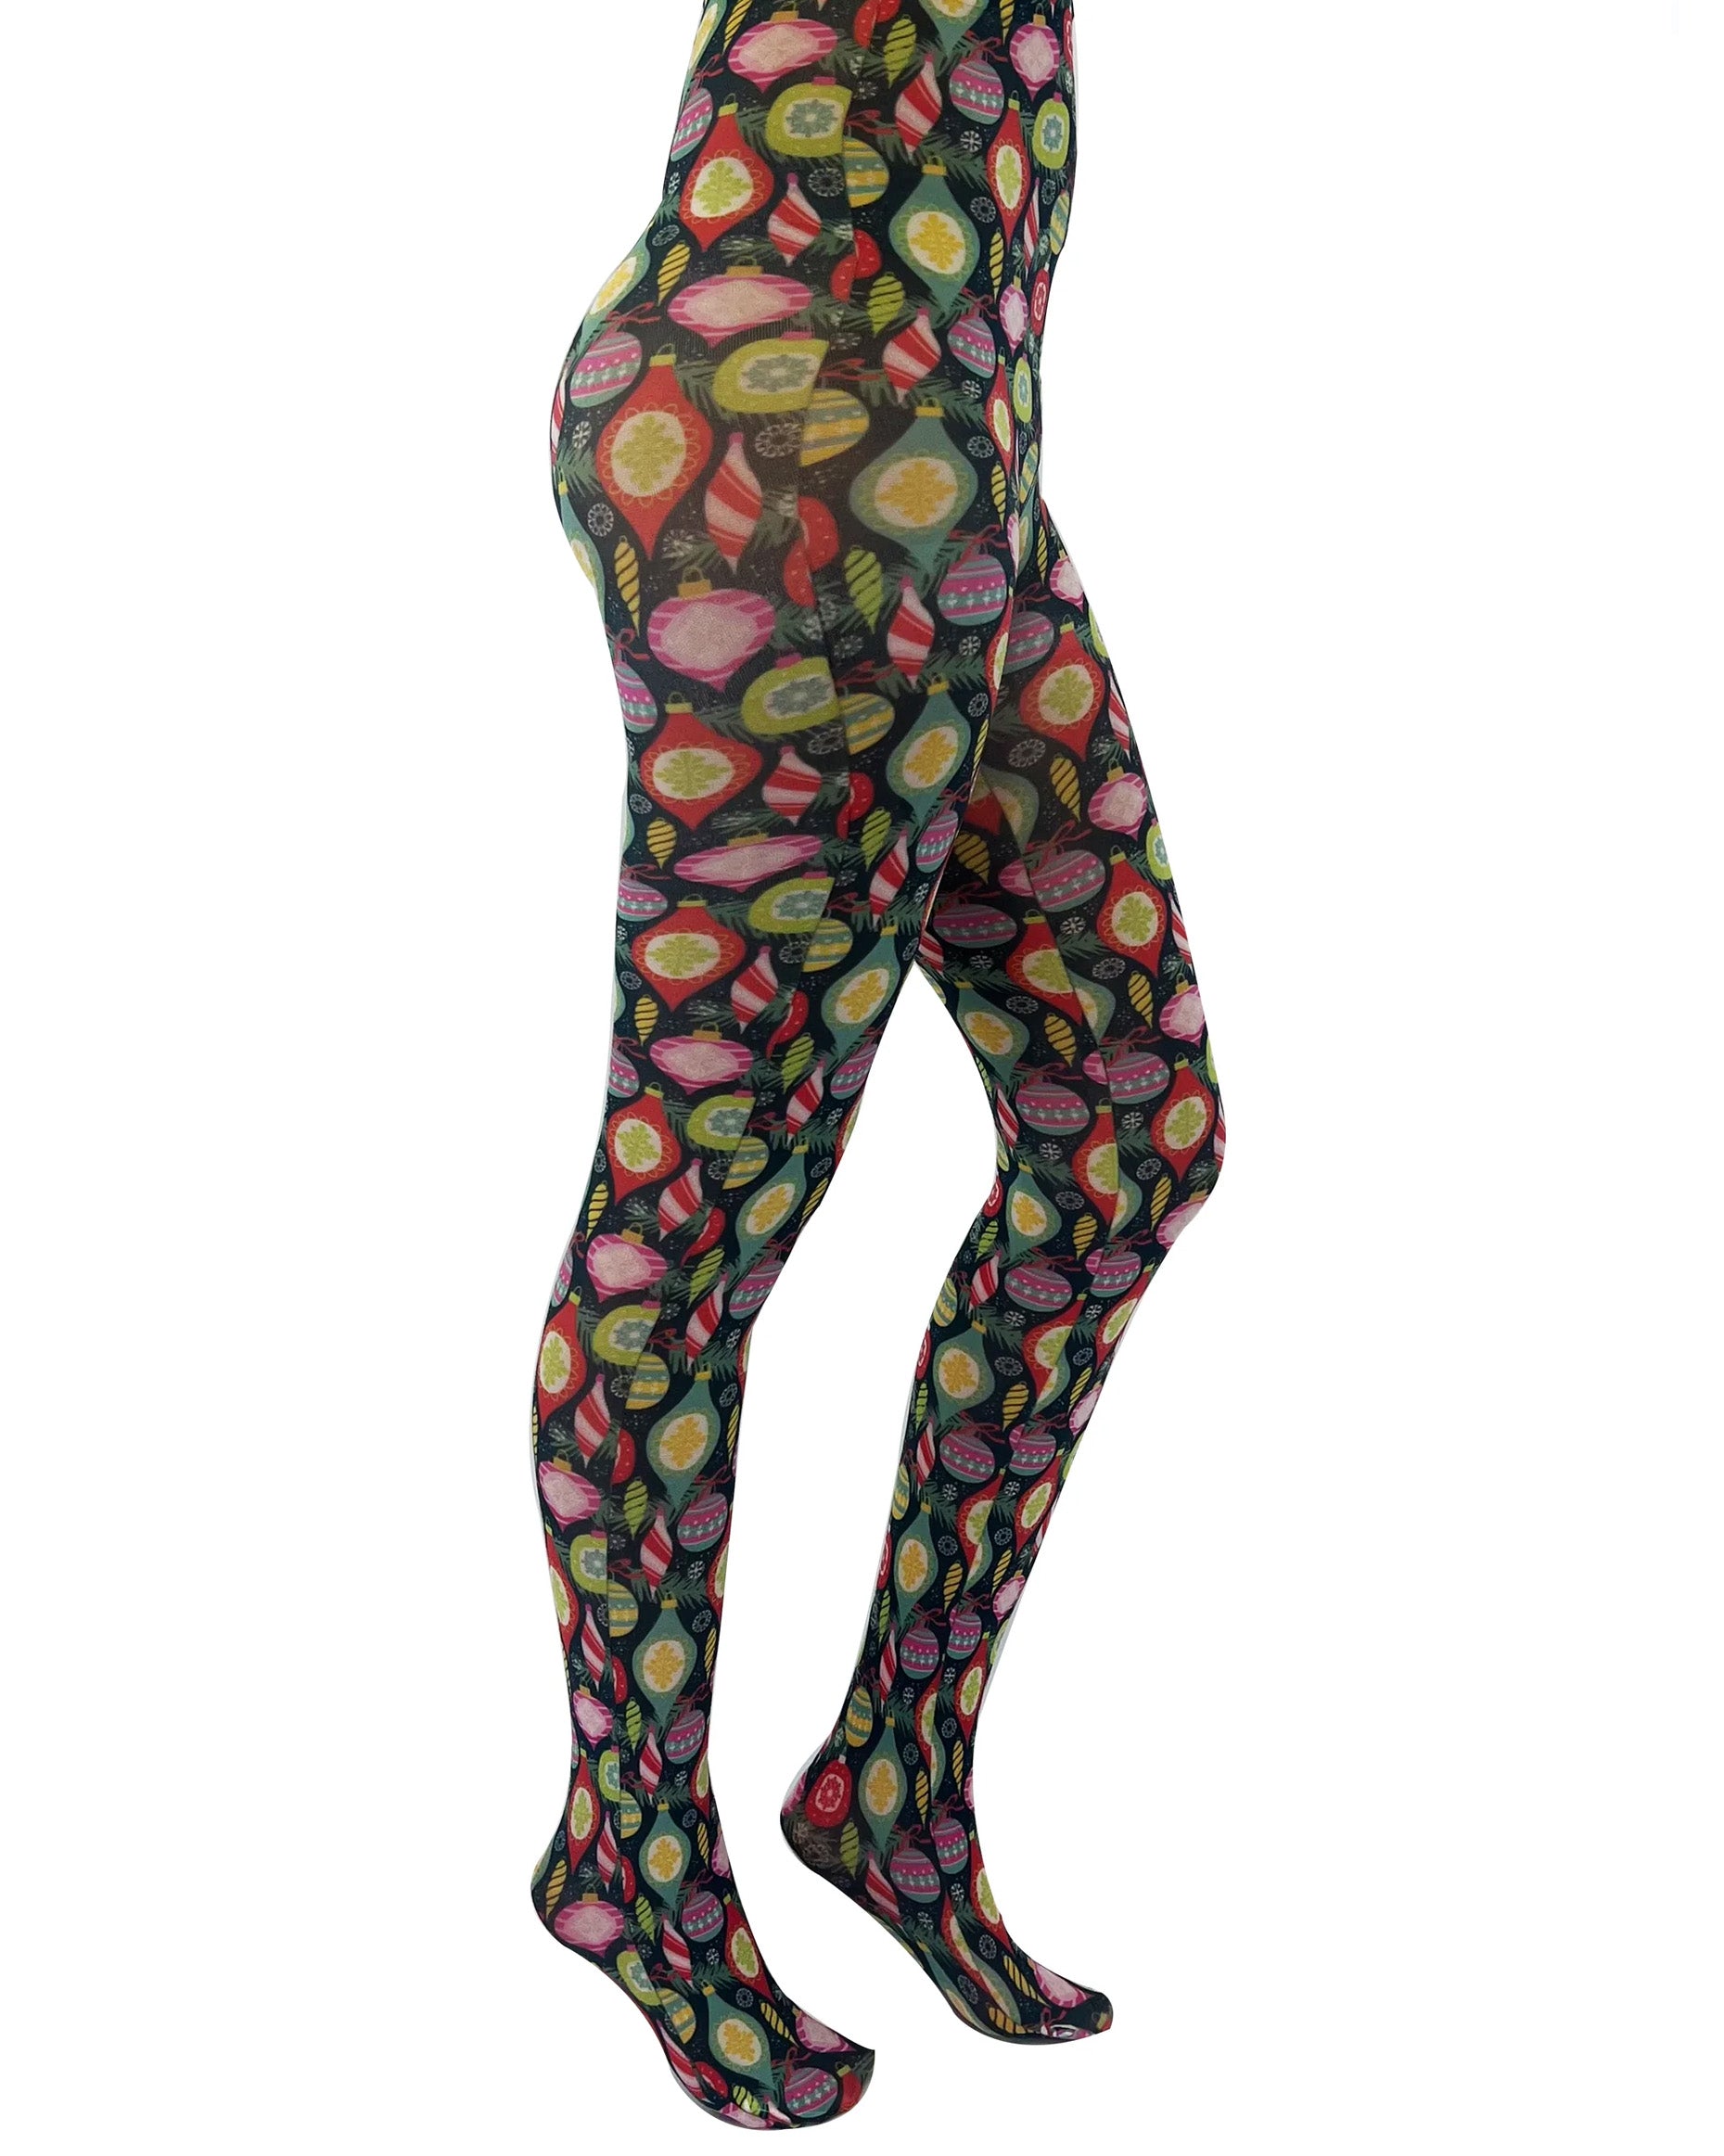 Pamela Mann Christmas Bauble Printed Tights - Xmas themed printed tights of multicoloured bauble tree decorations on a black background.